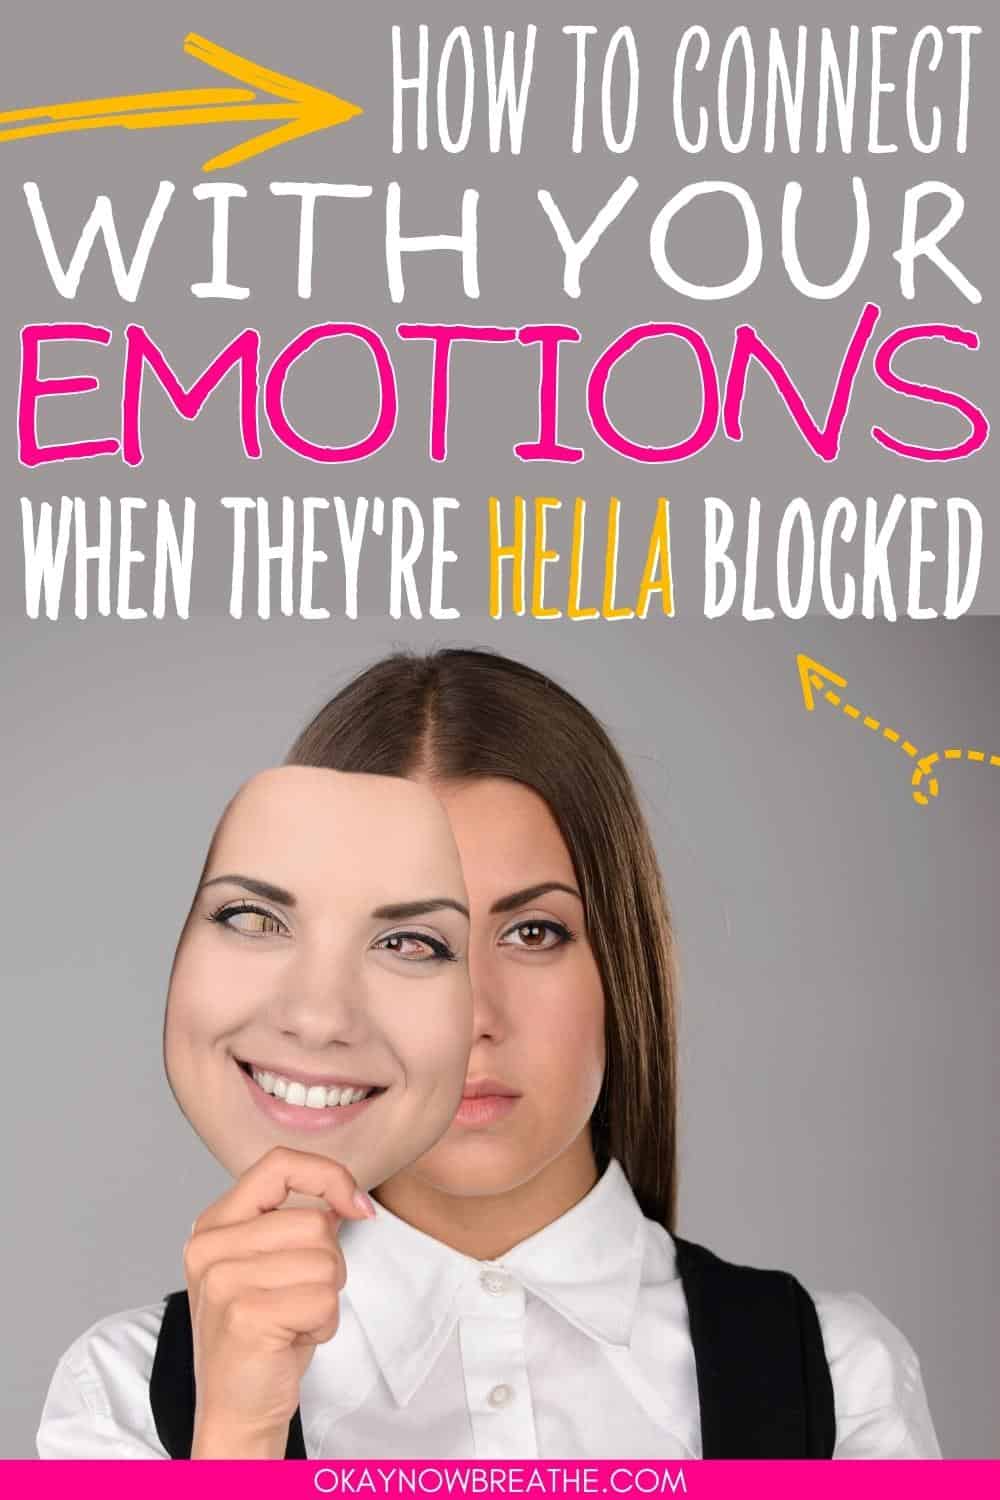 A white female with a white button up and black vest has a resting face. She is holding a image of her smiling face that's halfway covering her actual face. Above her, there are words that say "how to connect with your emotions when they're hella blocked. - okaynowbreathe.com"